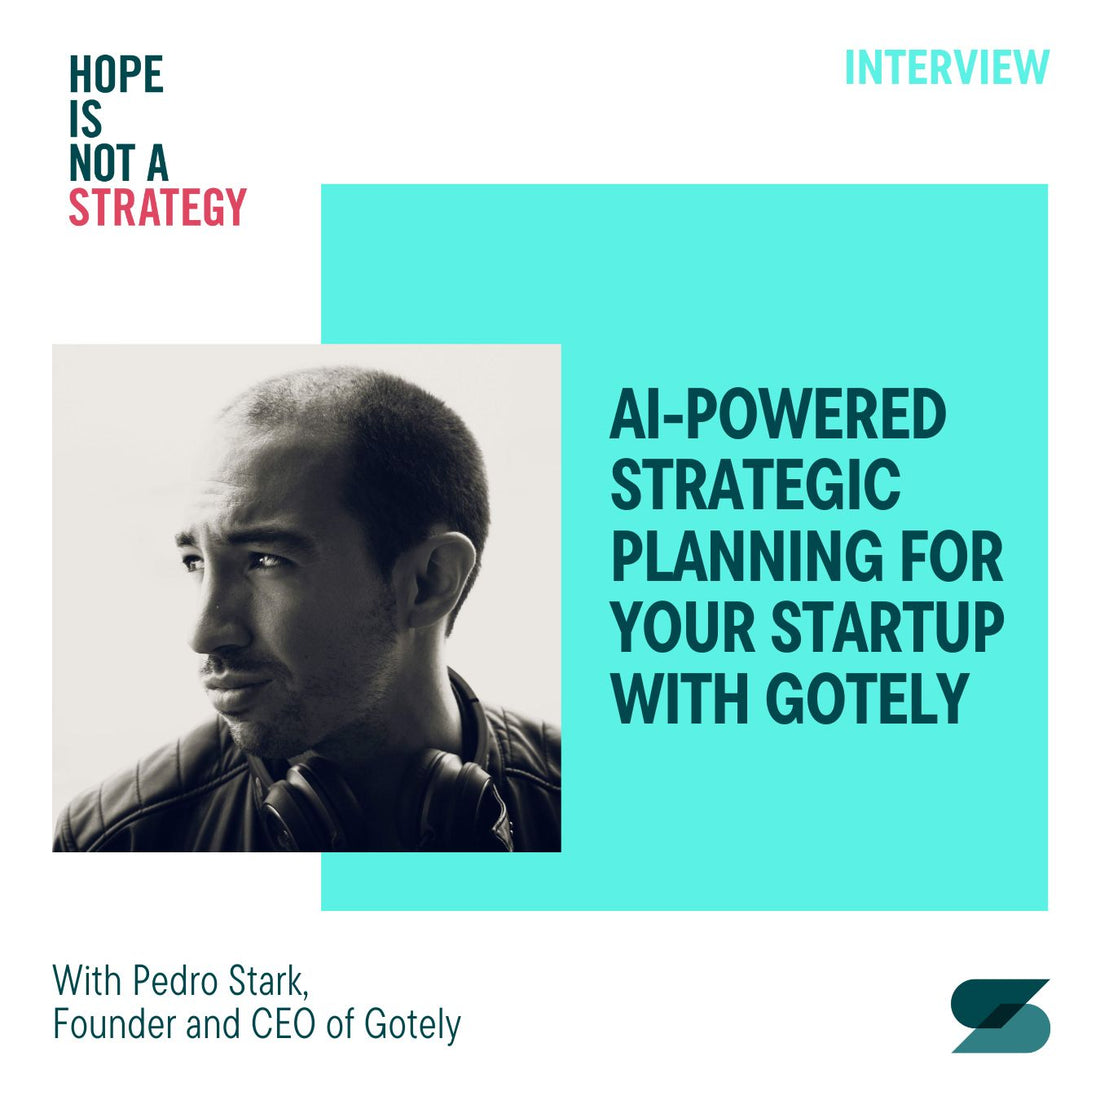 #09 Pedro Stark: AI-powered strategic planning for your startup with gotely